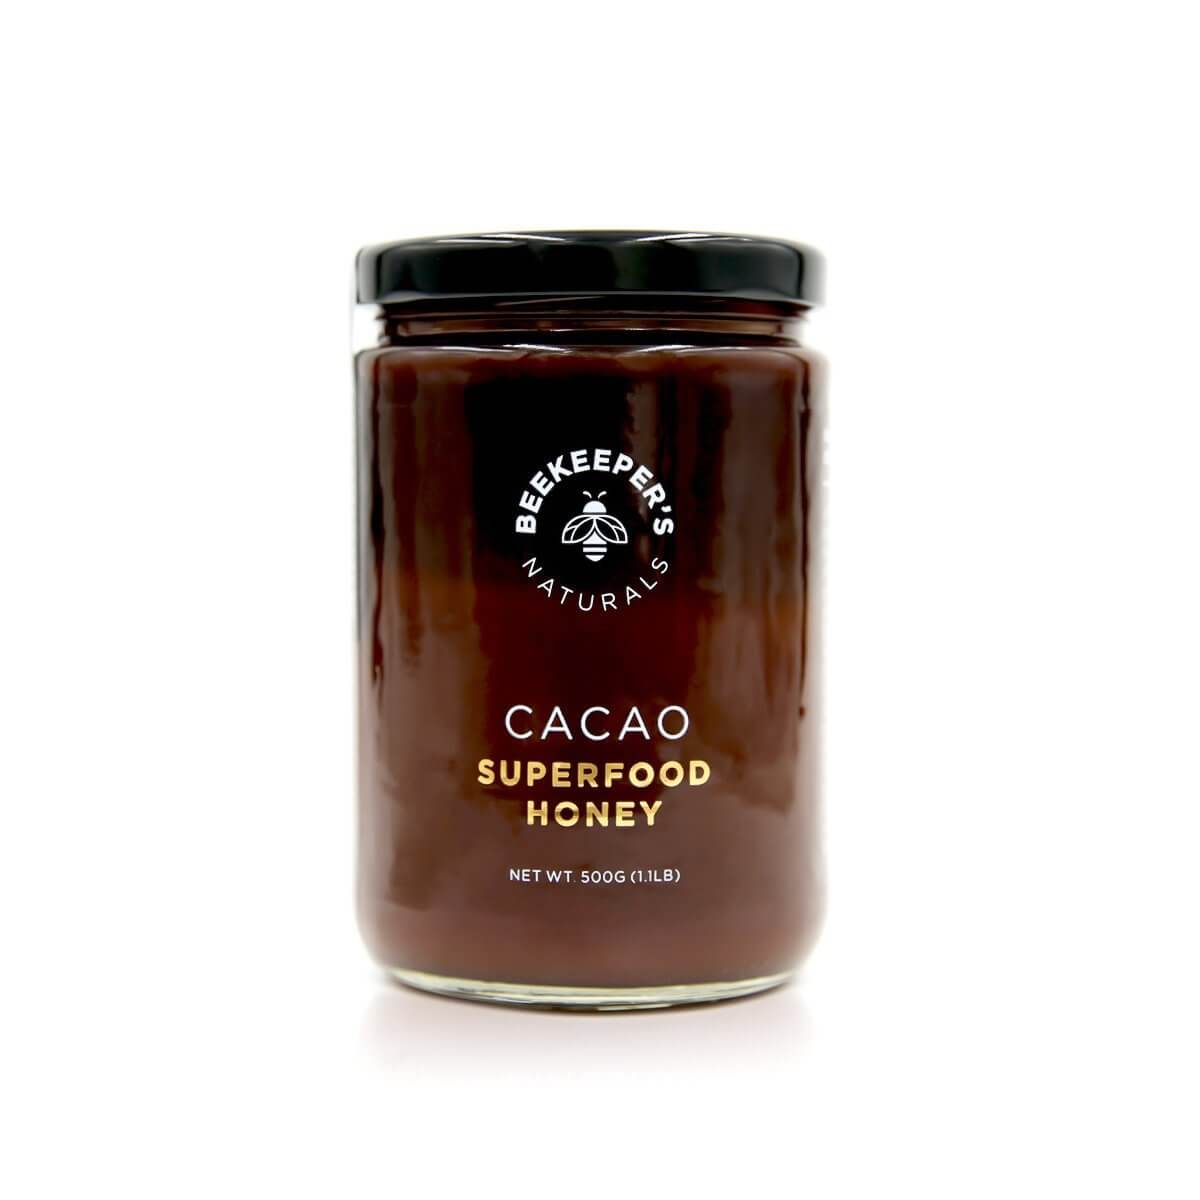 Cacao Superfood Honey by Beekeeper's Naturals Wellness Beekeeper's Naturals Prettycleanshop